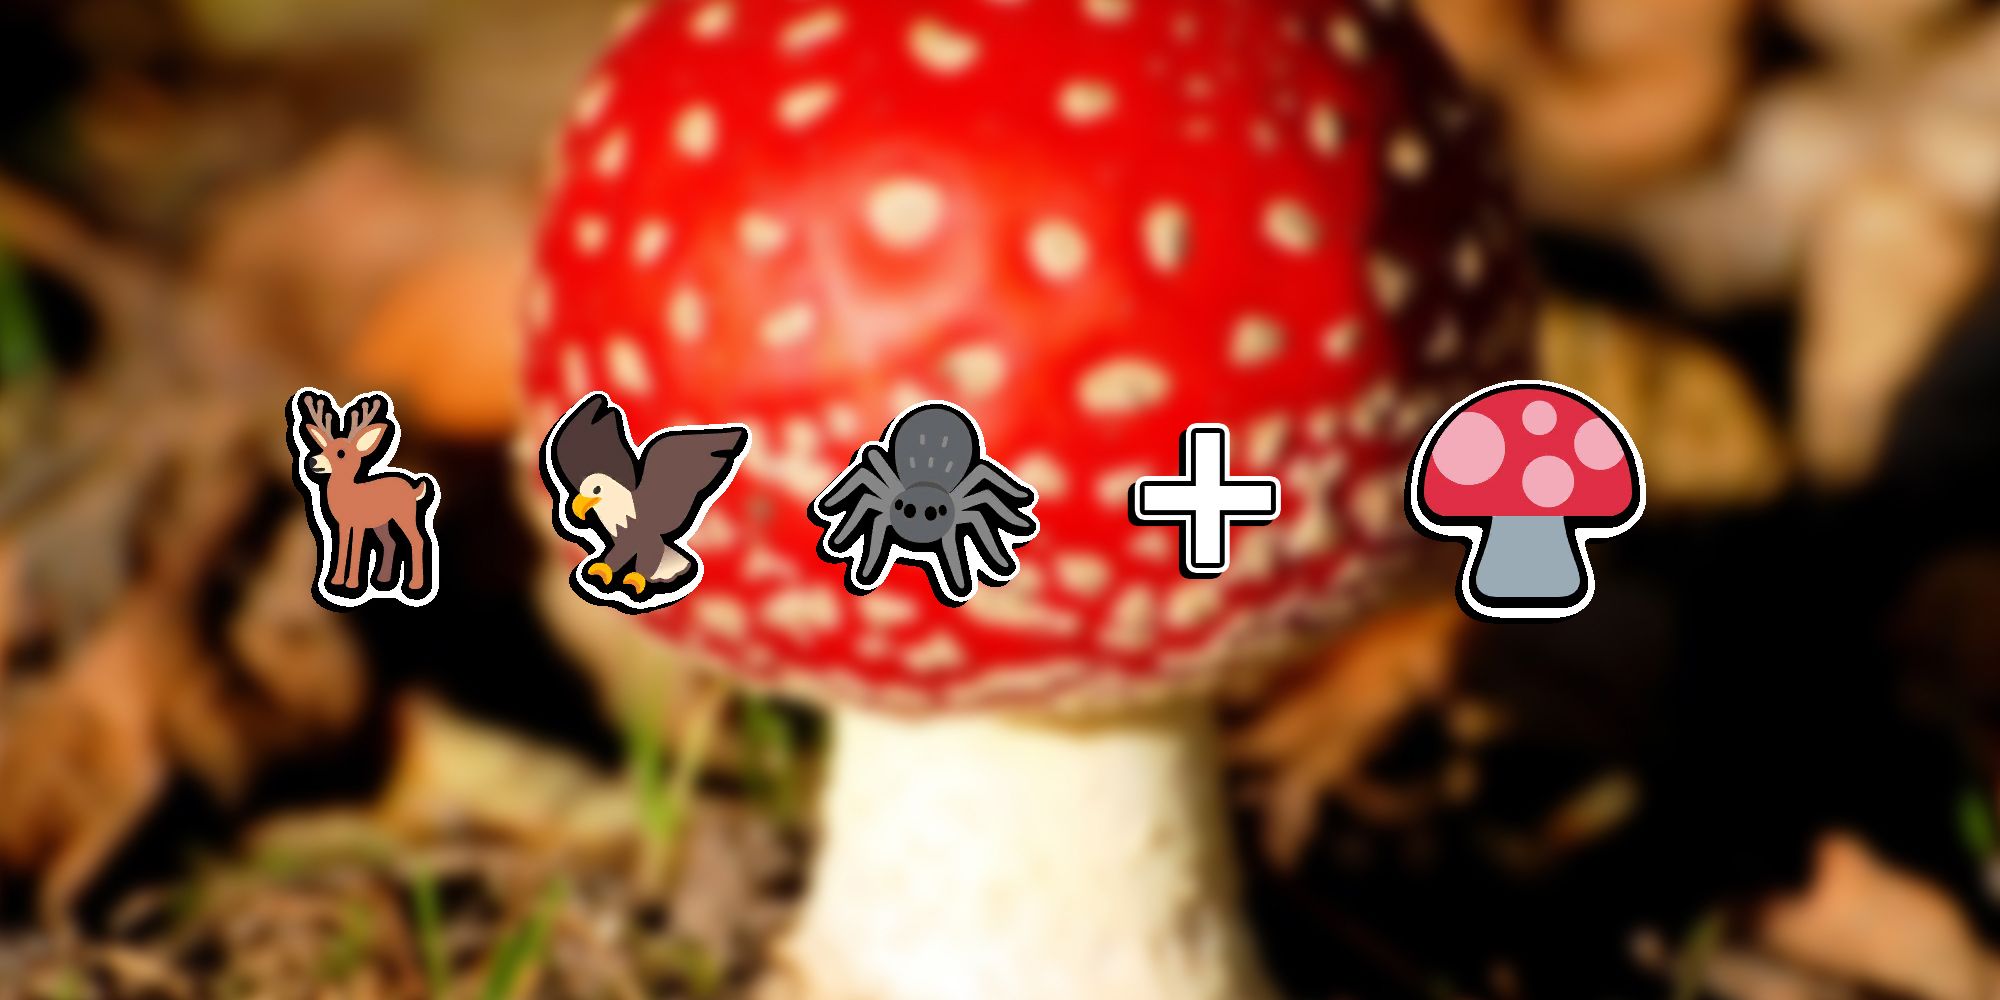 Super Auto Pets - PNG Of All The Units That Benefit From Mushroom Item Overlaid On Image Of Real Life Mario-Like Mushroom